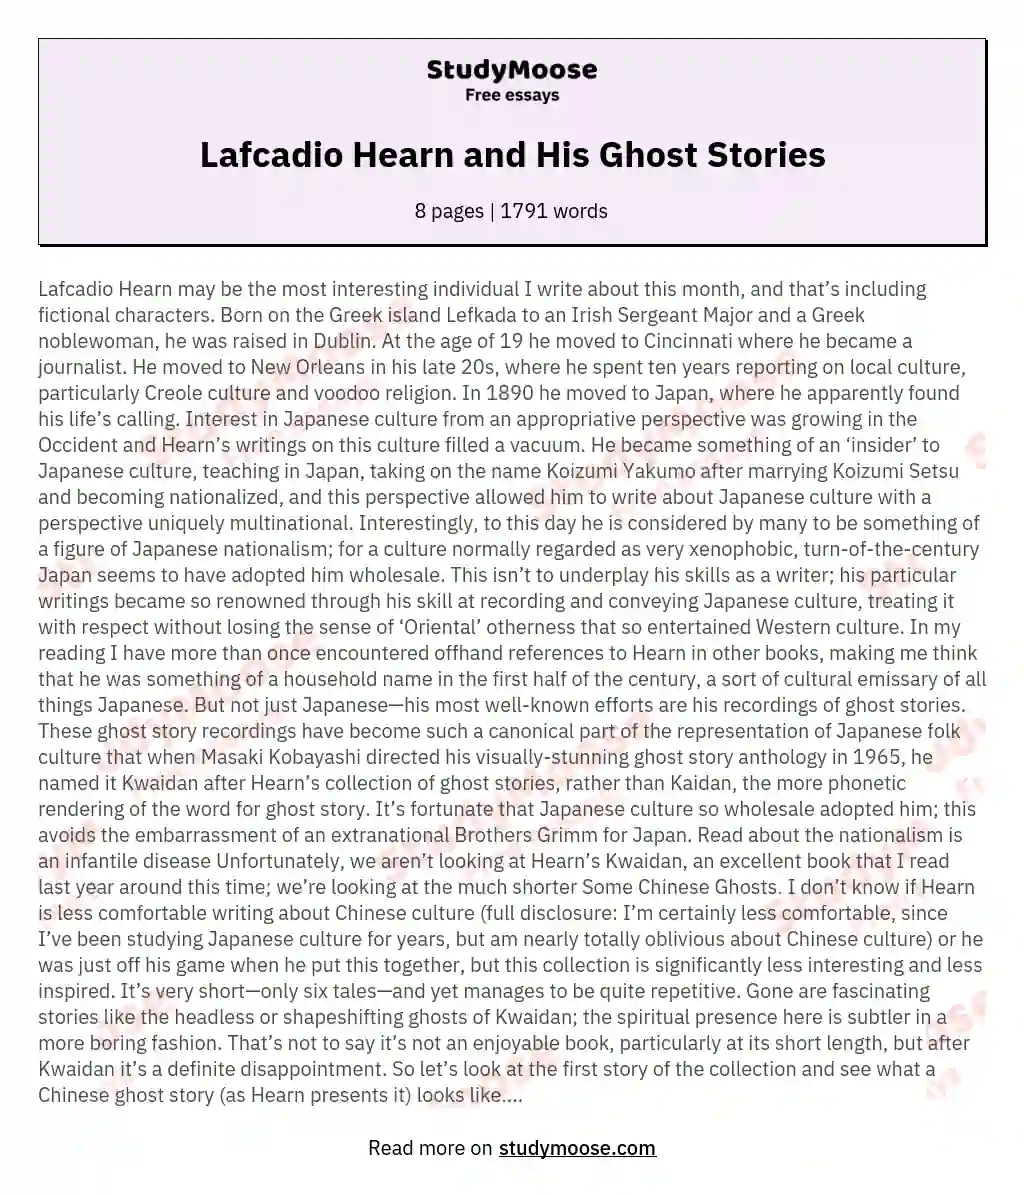 Lafcadio Hearn and His Ghost Stories essay